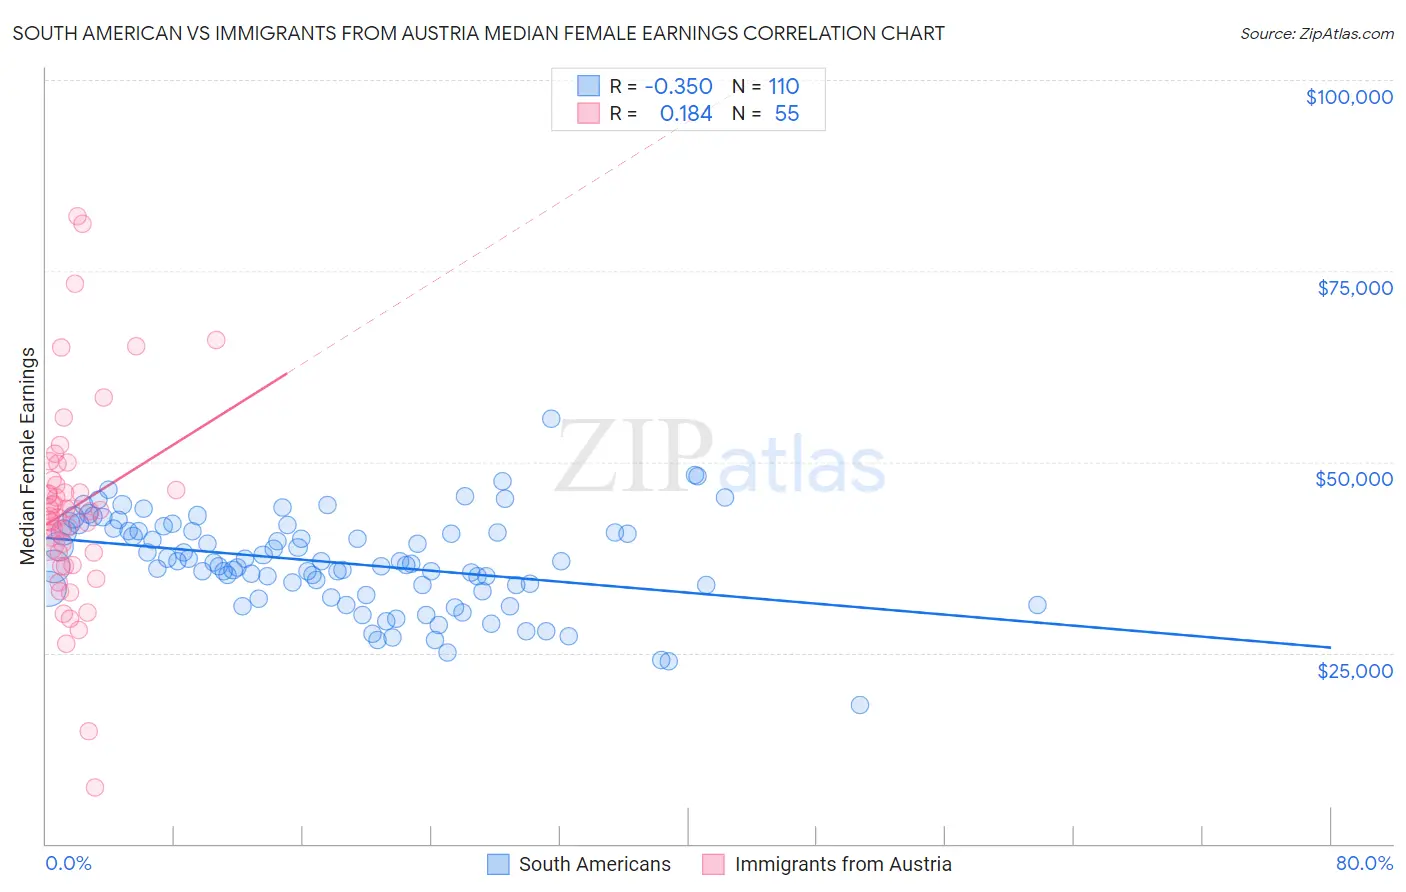 South American vs Immigrants from Austria Median Female Earnings